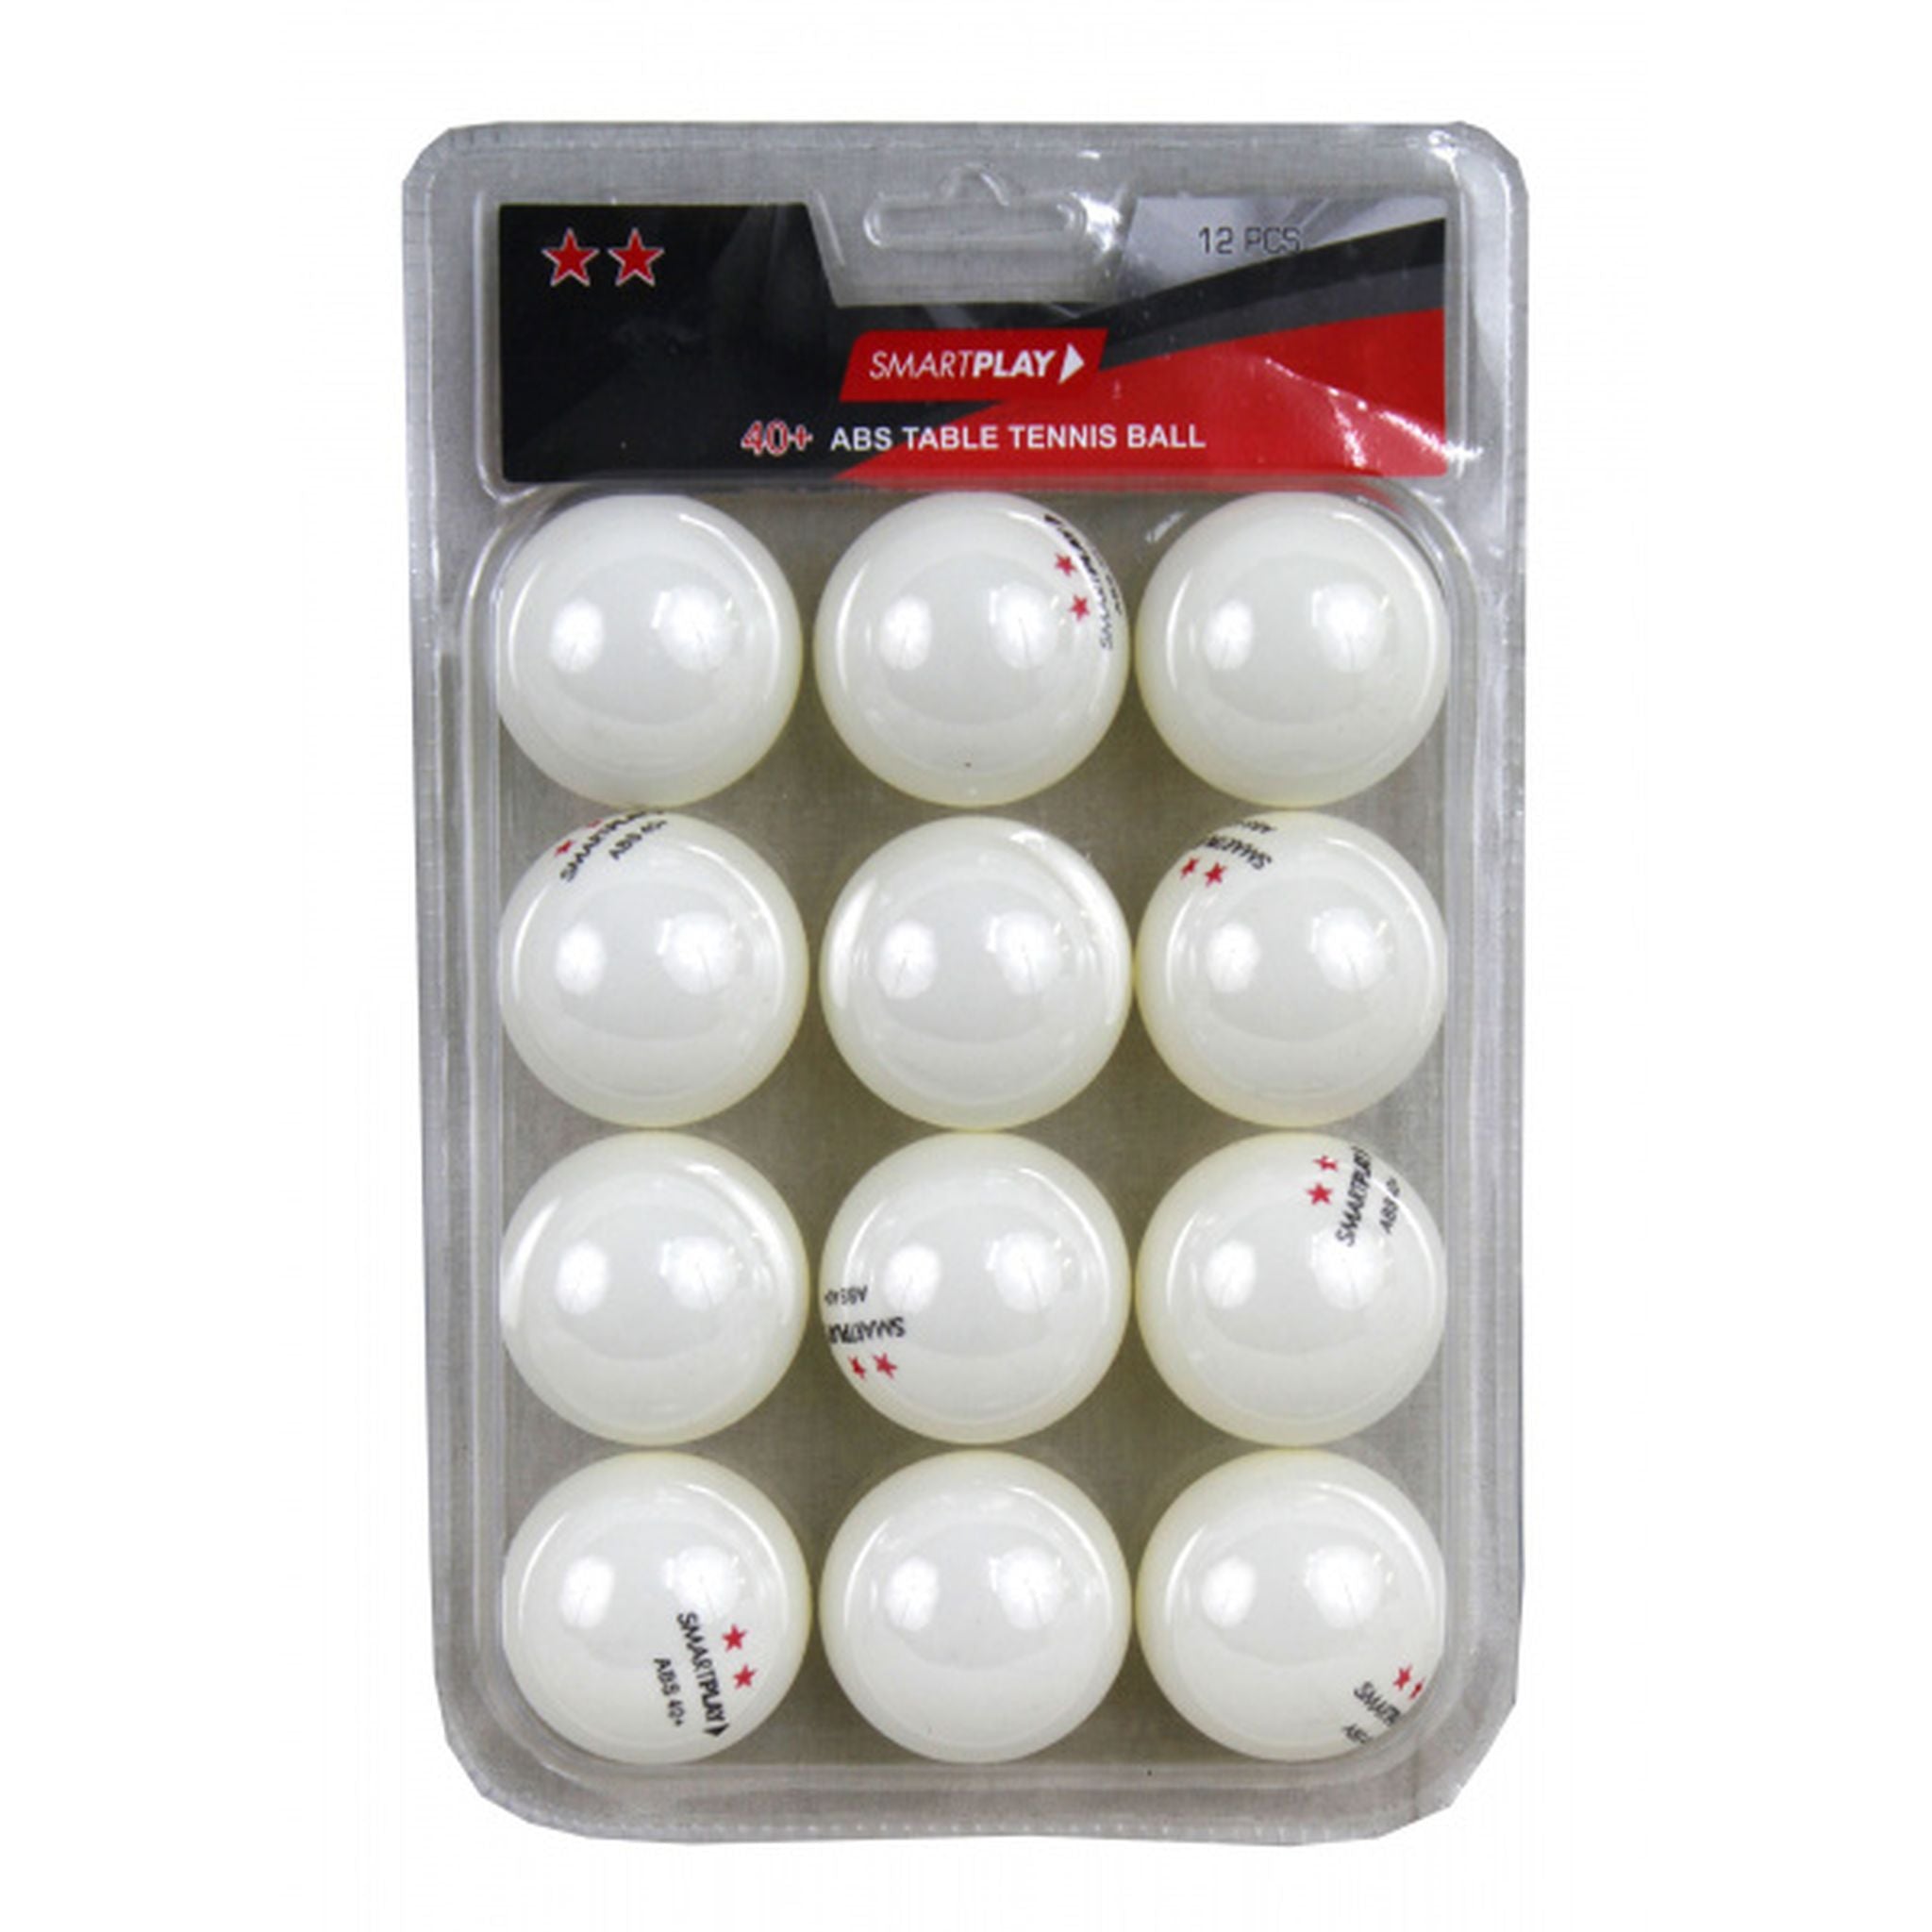 SMARTPLAY 2 Star WHITE Table Tennis Balls - PACK OF 12